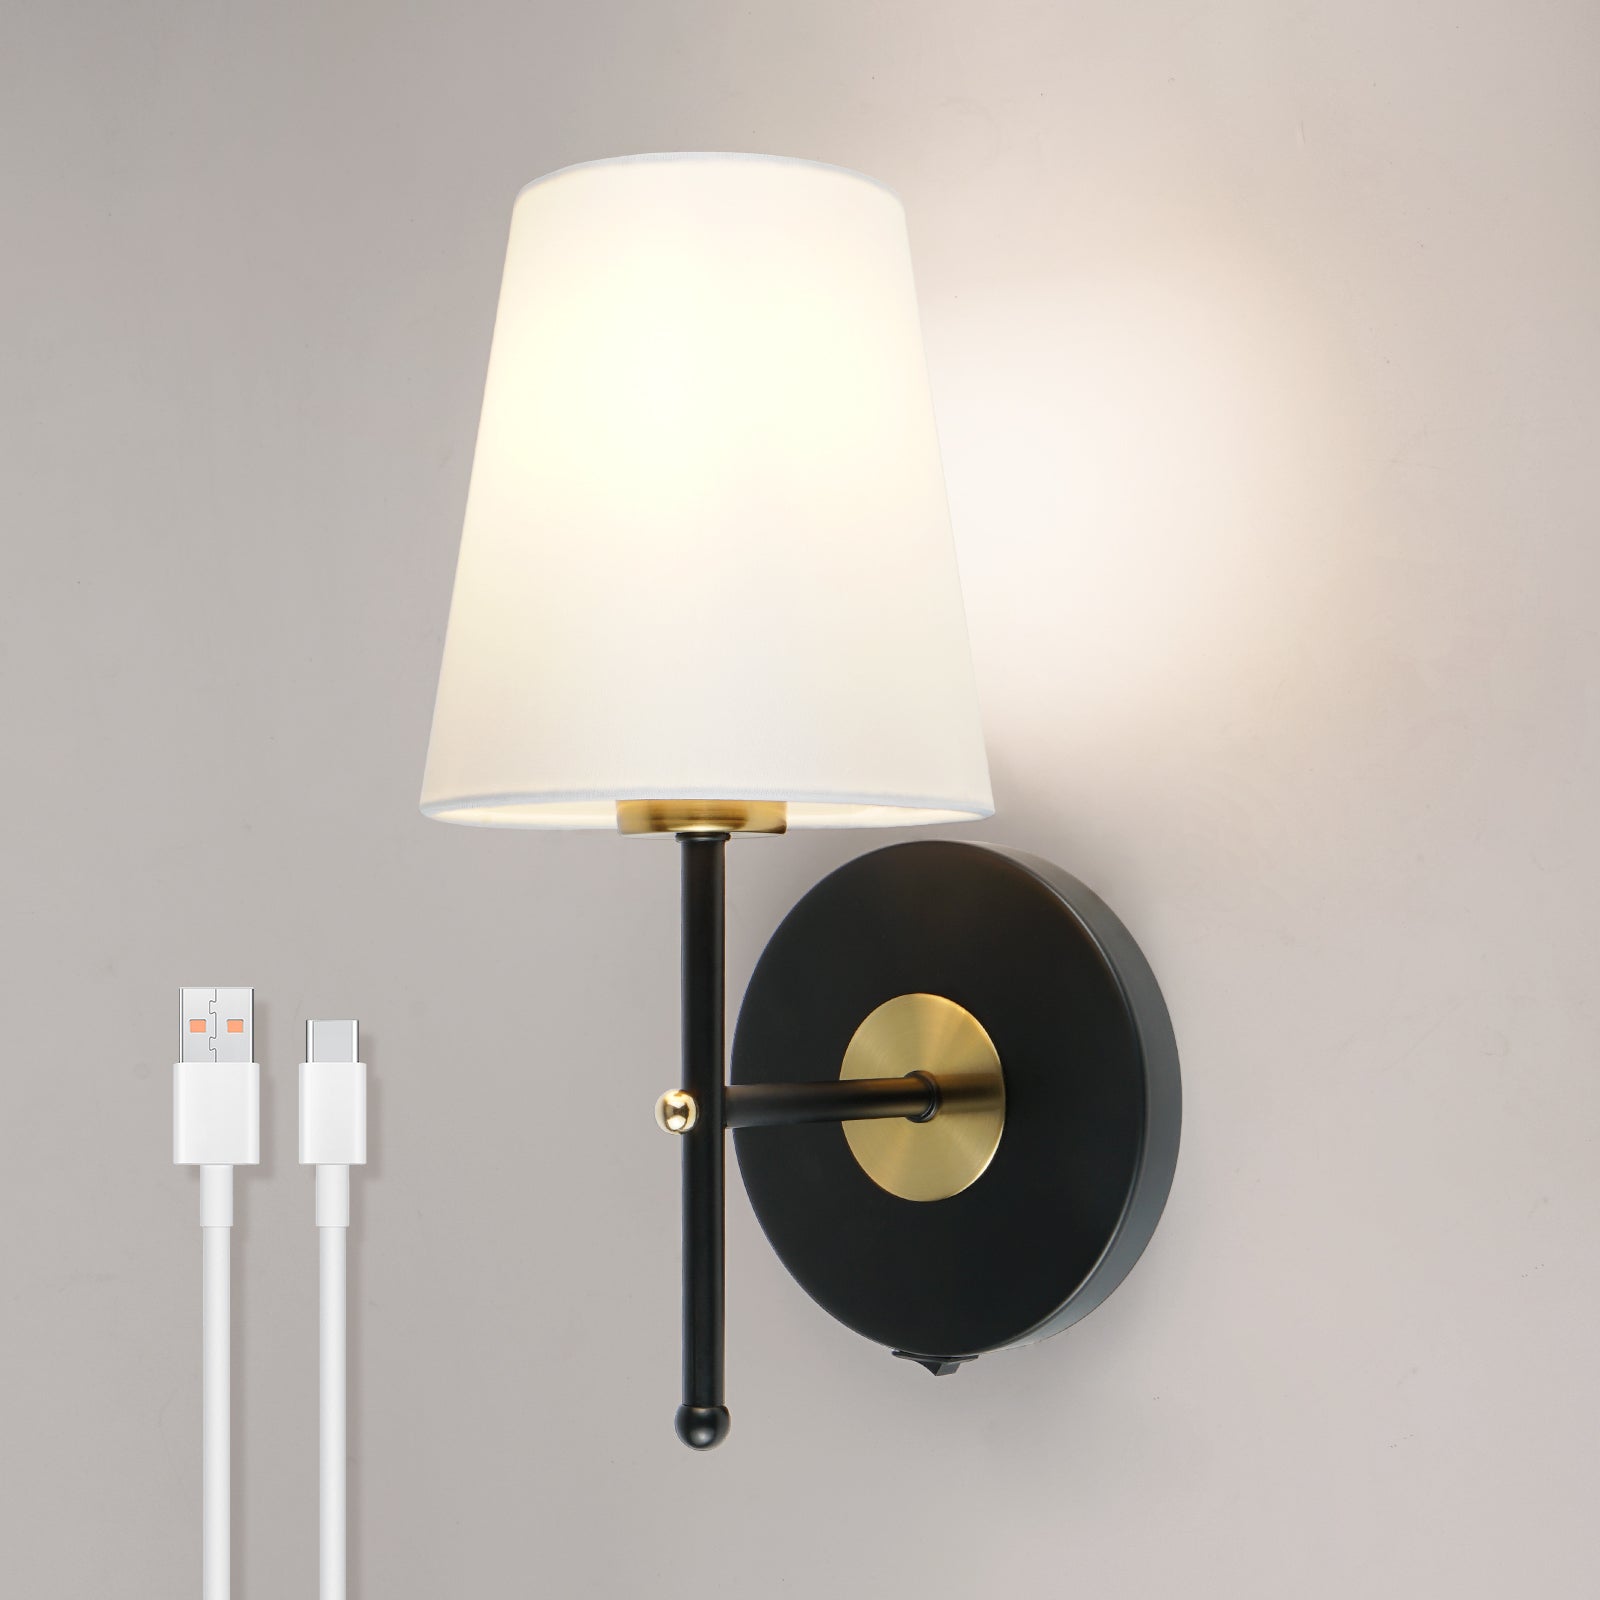 C01  Wireless Fabric Battery Operated Wall Lamp for Bathroom